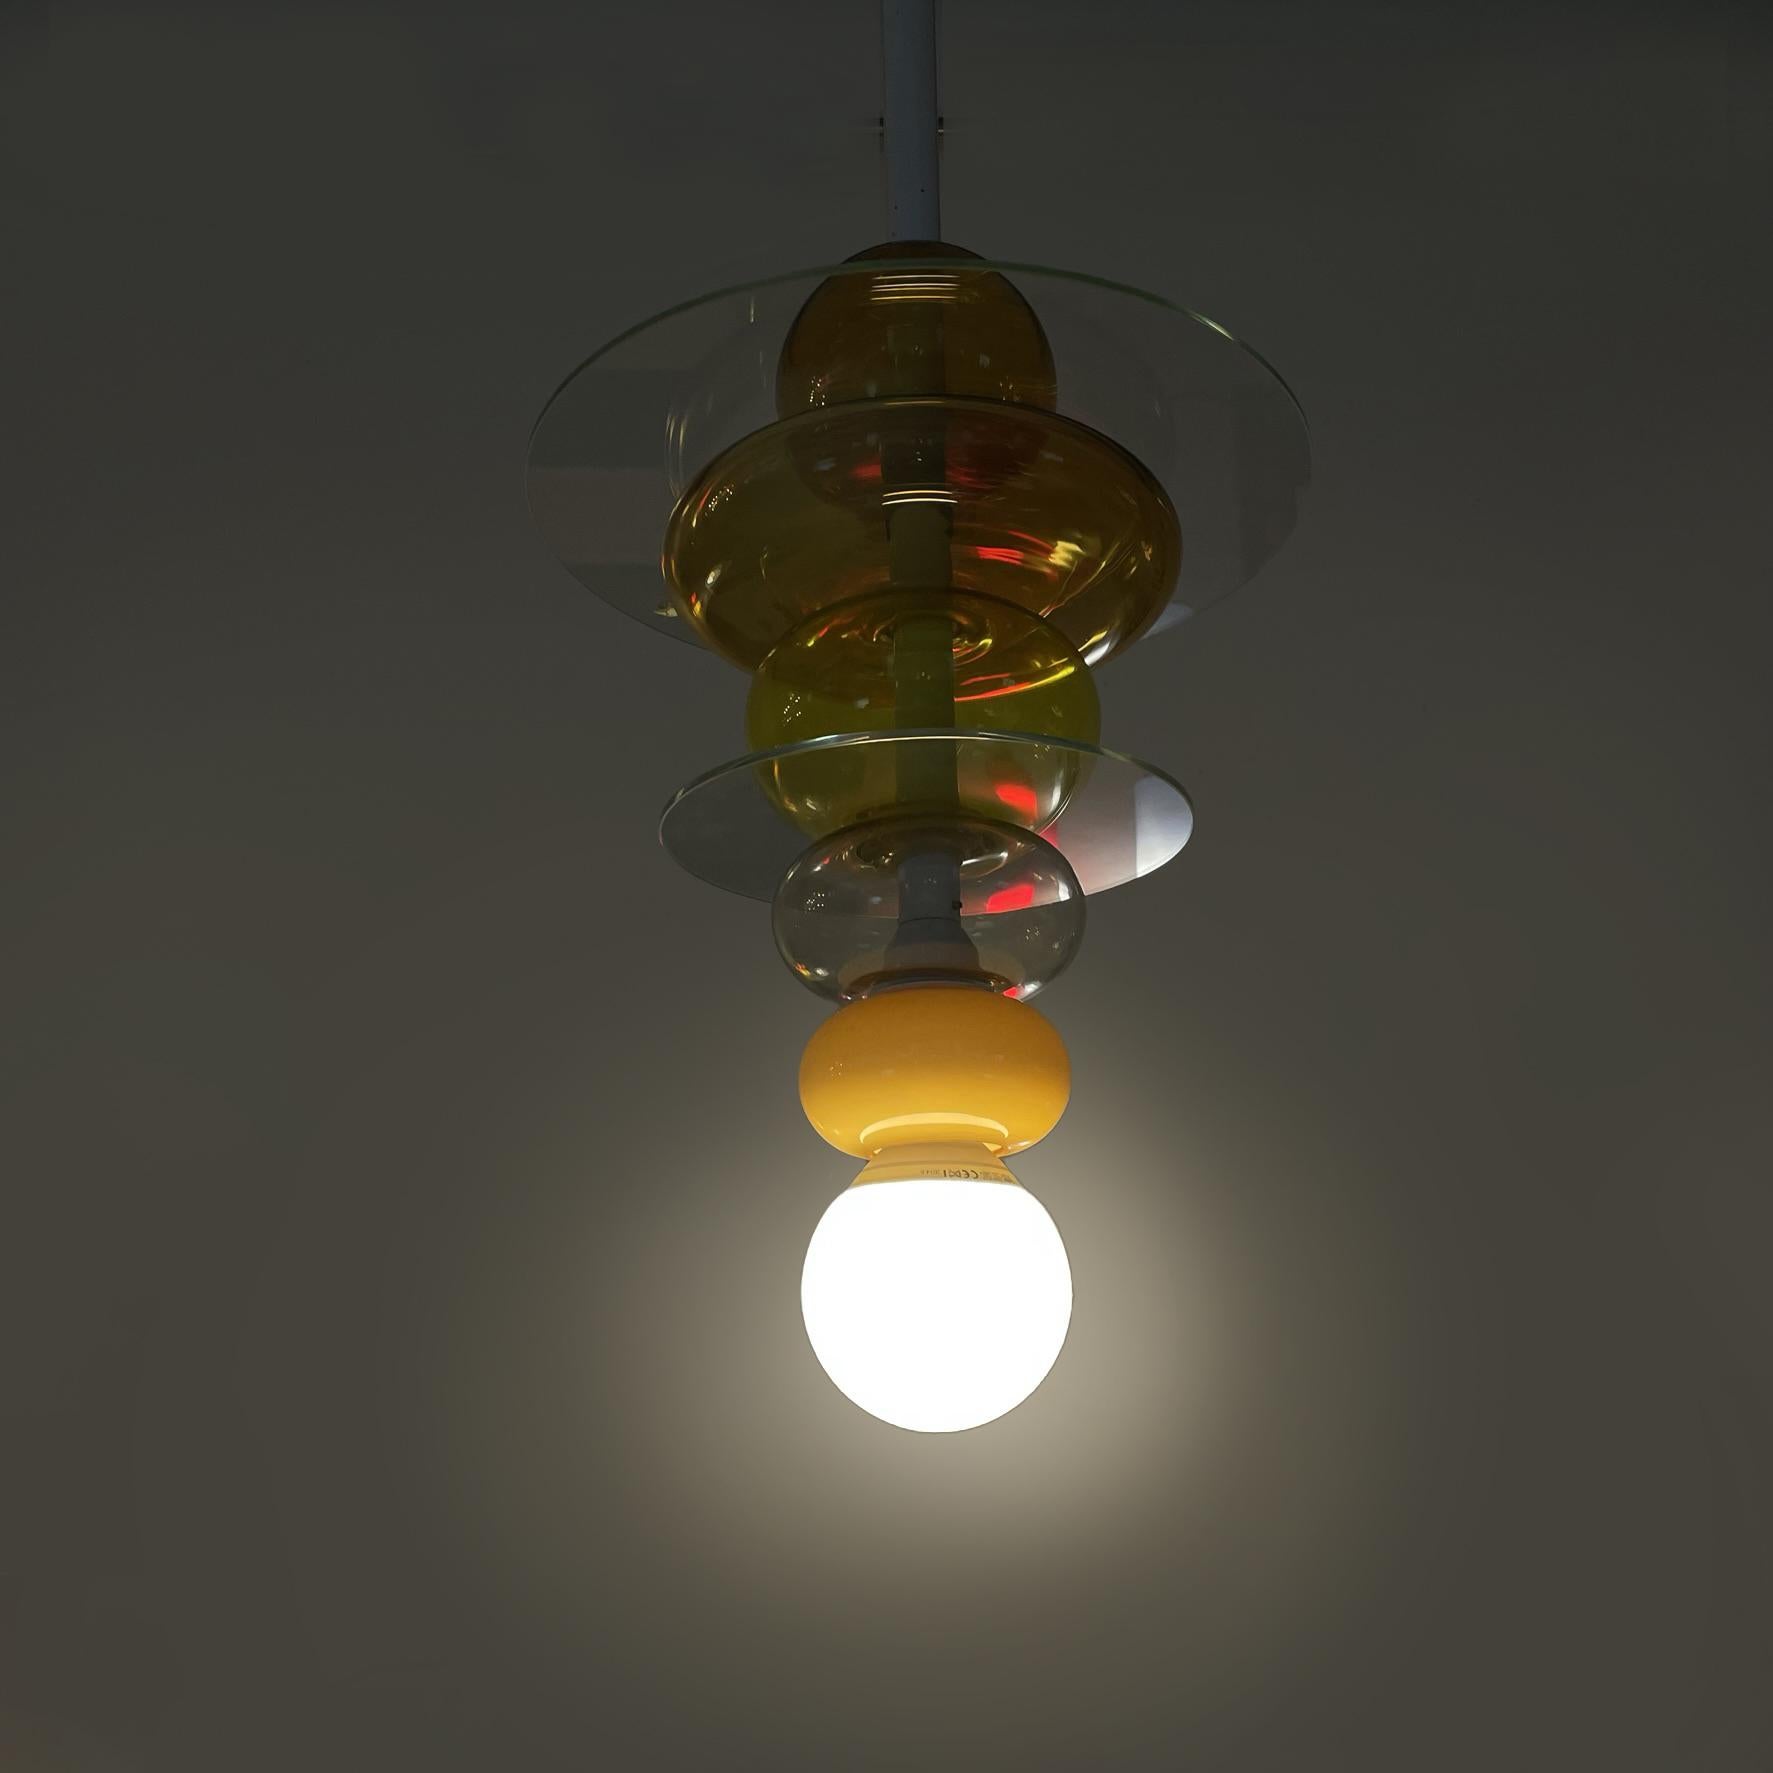 Italian modern glass chandelier Firenze by Ettore Sottsass for Venini, 1990s
Chandelier mod. Firenze (Florence) composed of a series of transparent and yellow glass spheres, interspersed with round glass discs. Structure in white painted metal.
It